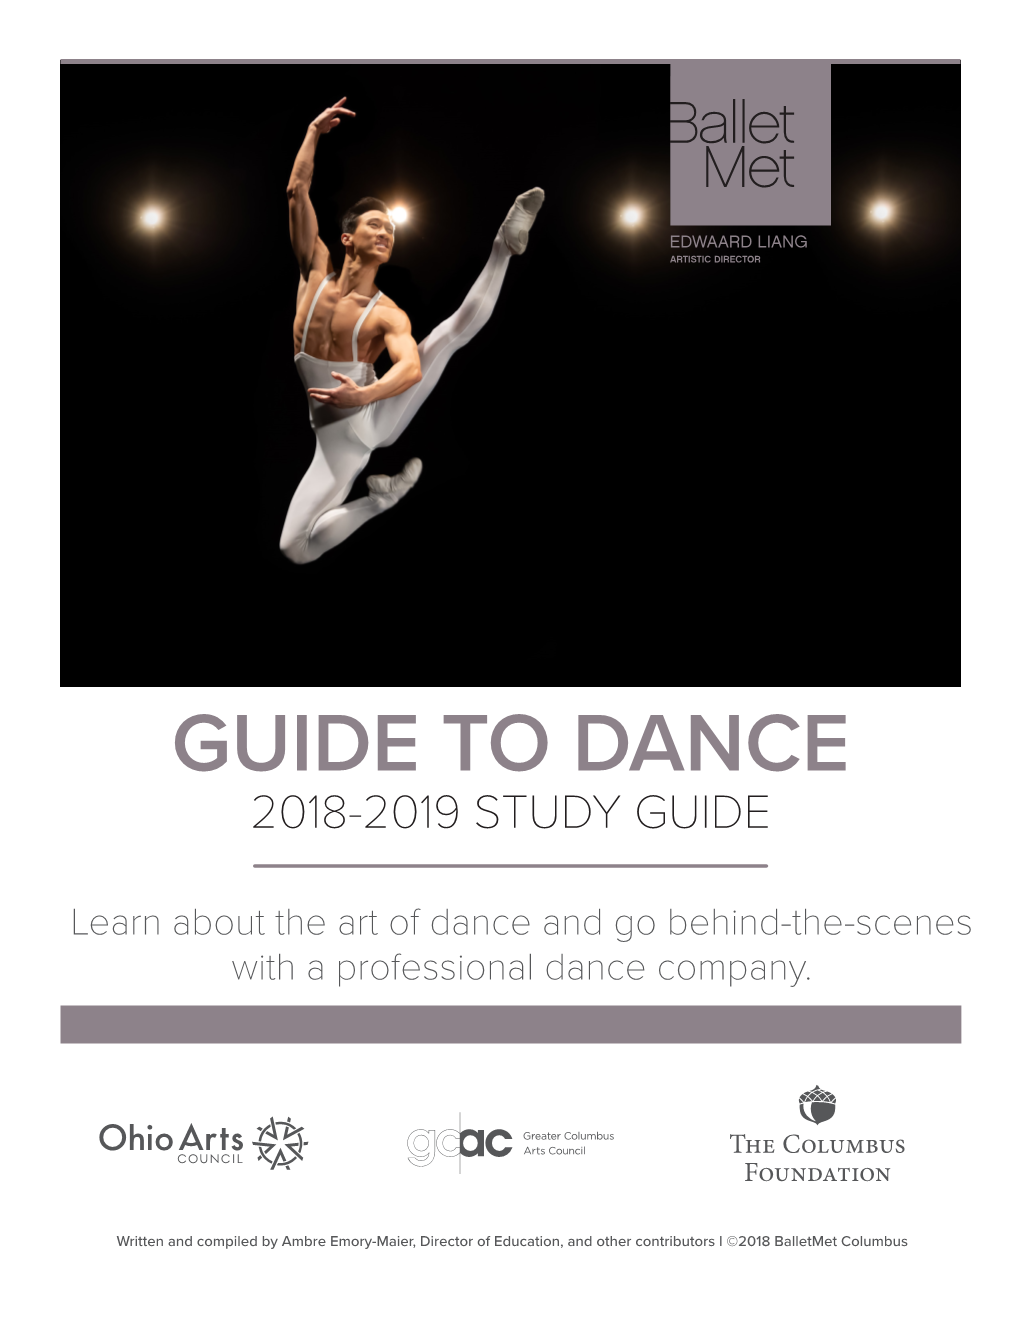 Guide to Dance 2018-2019 Study Guide